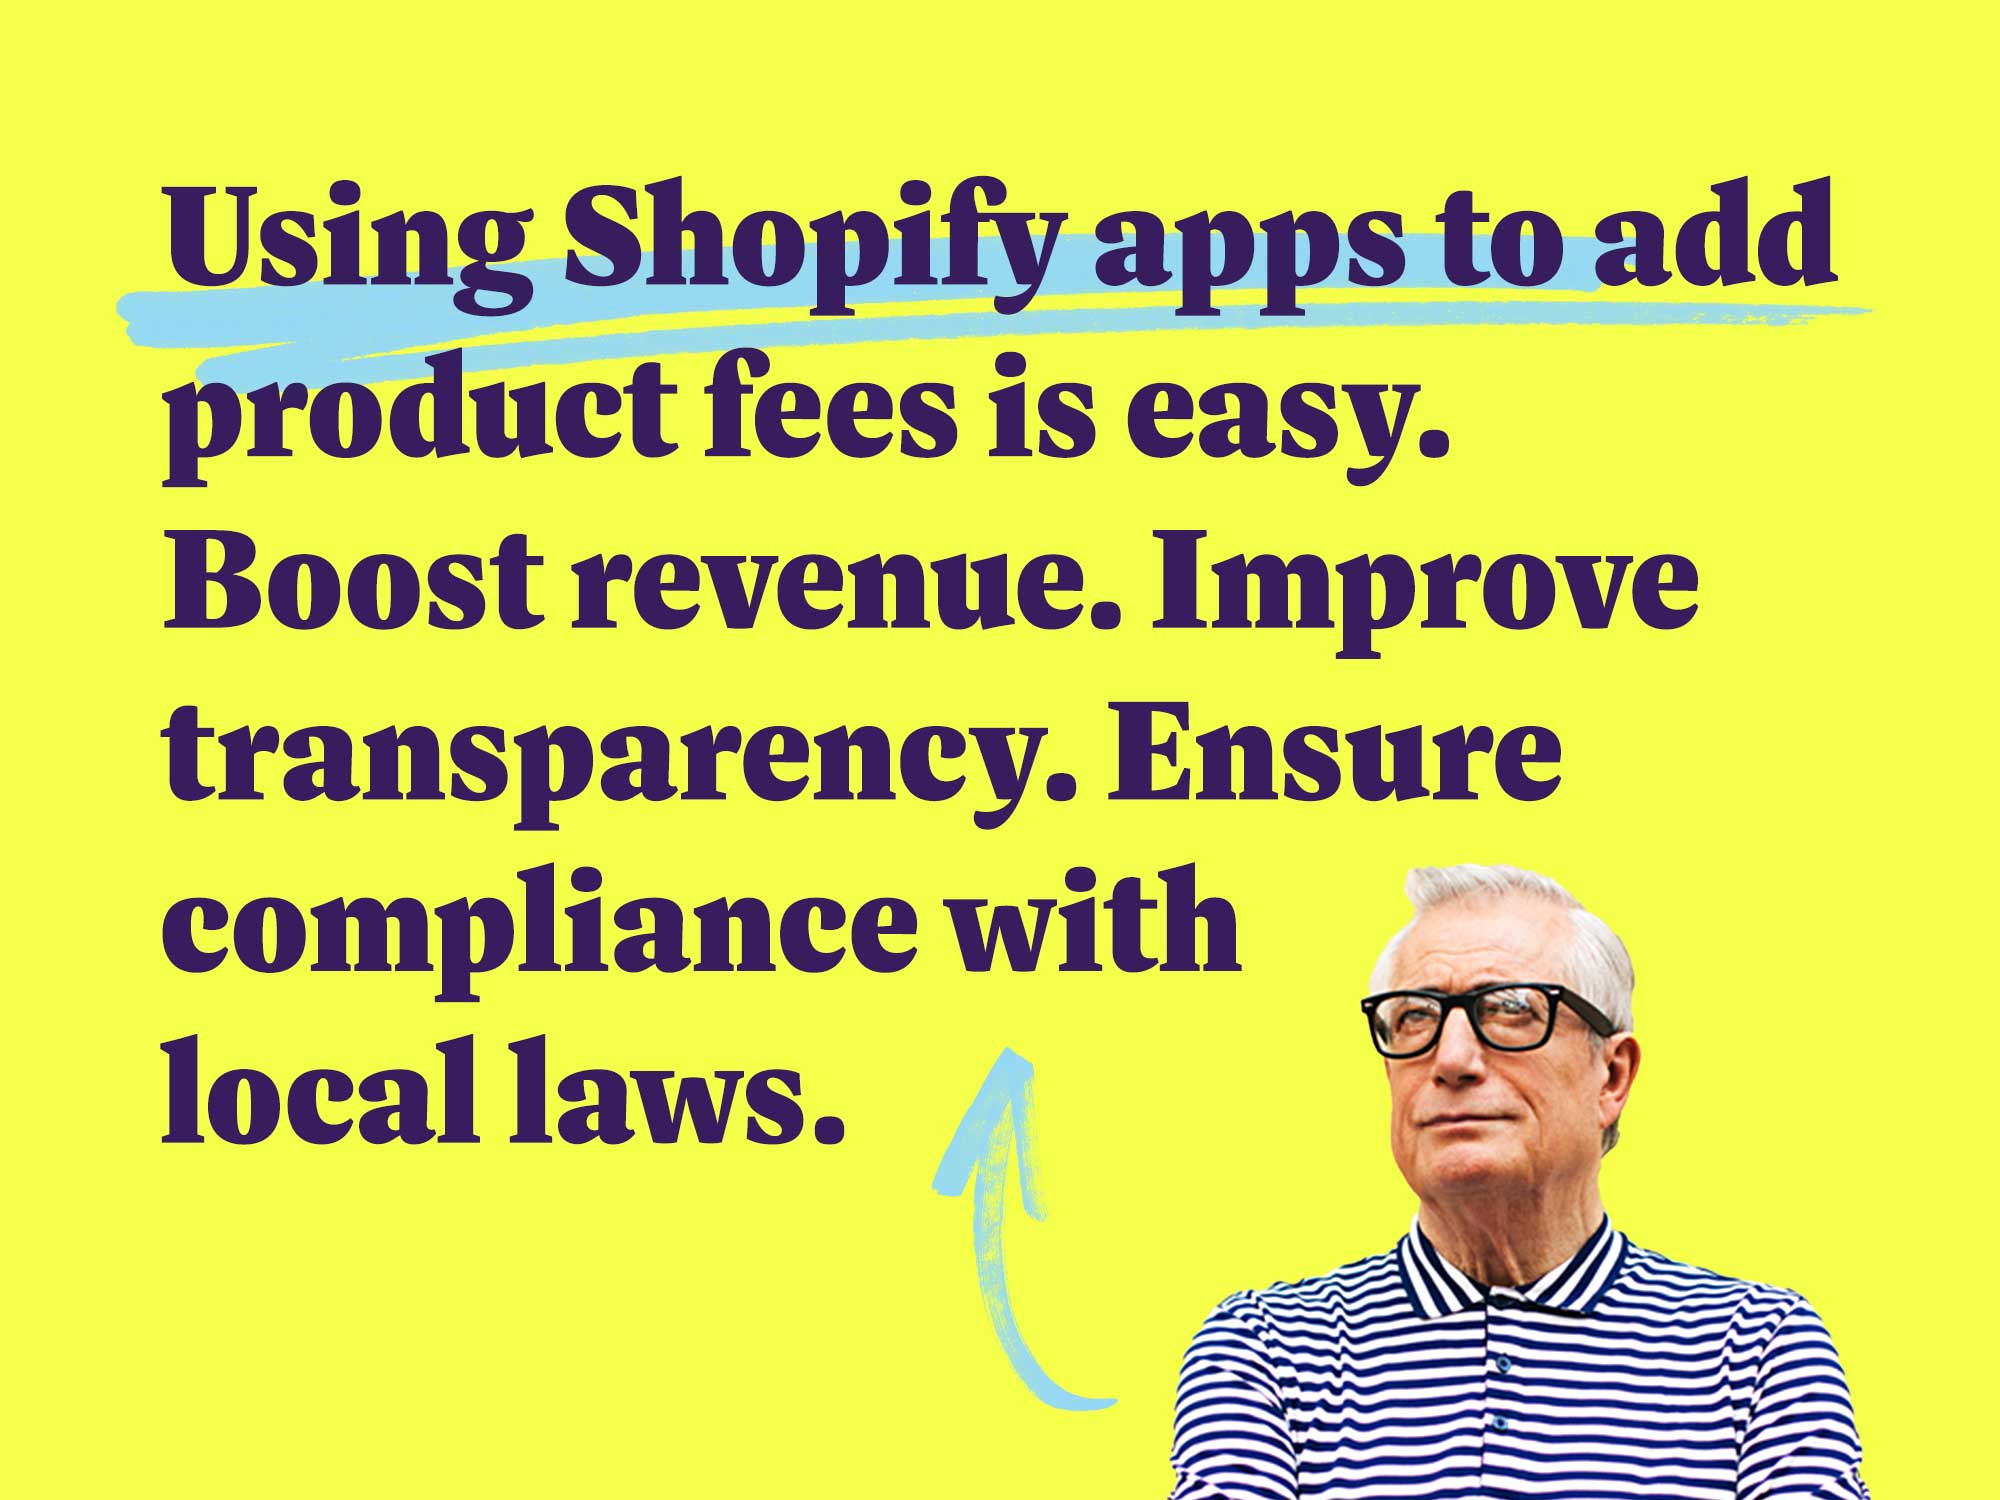 Using Shopify apps to add product fees is easy. Boost revenue. Improve transparency. Ensure compliance with local laws.